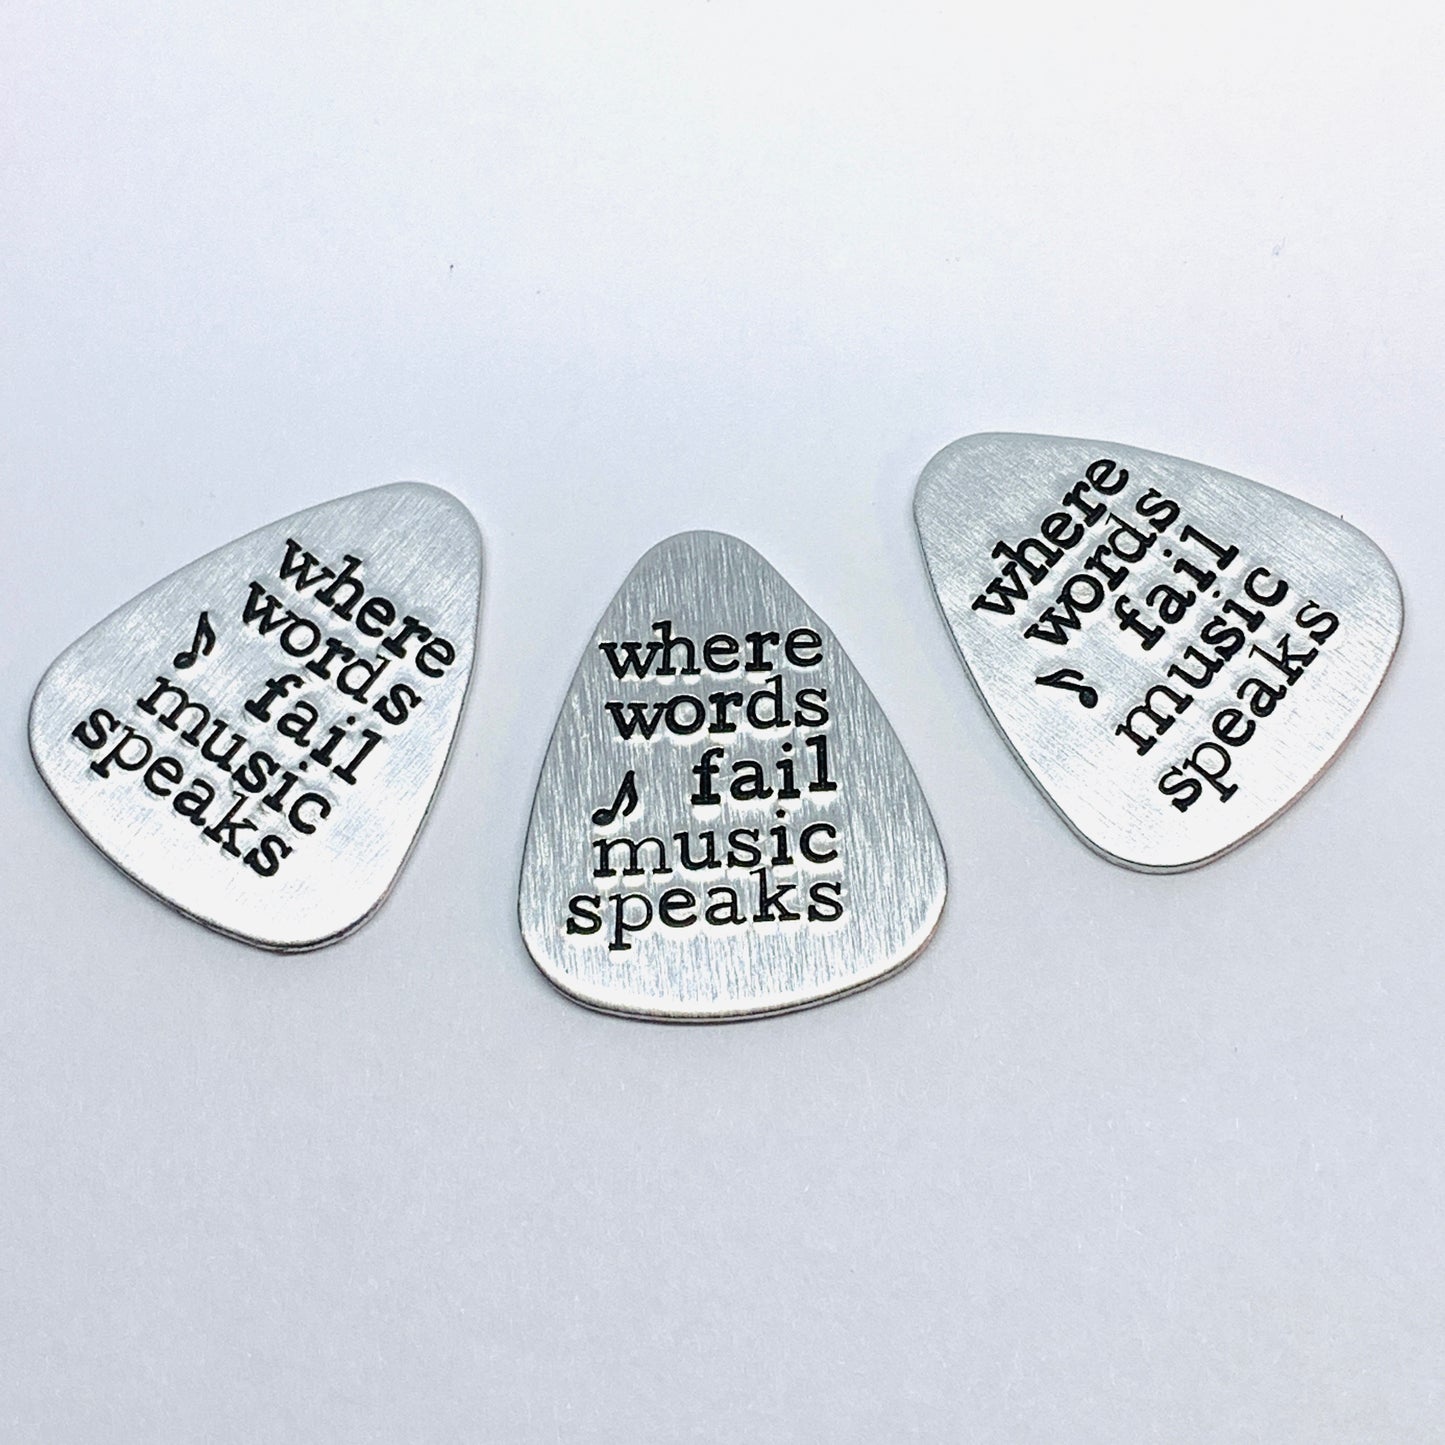 Where words fail music speaks - Hand Stamped Metal Guitar Pick | Guitar Pick Quote | Hans Christian Anderson Active